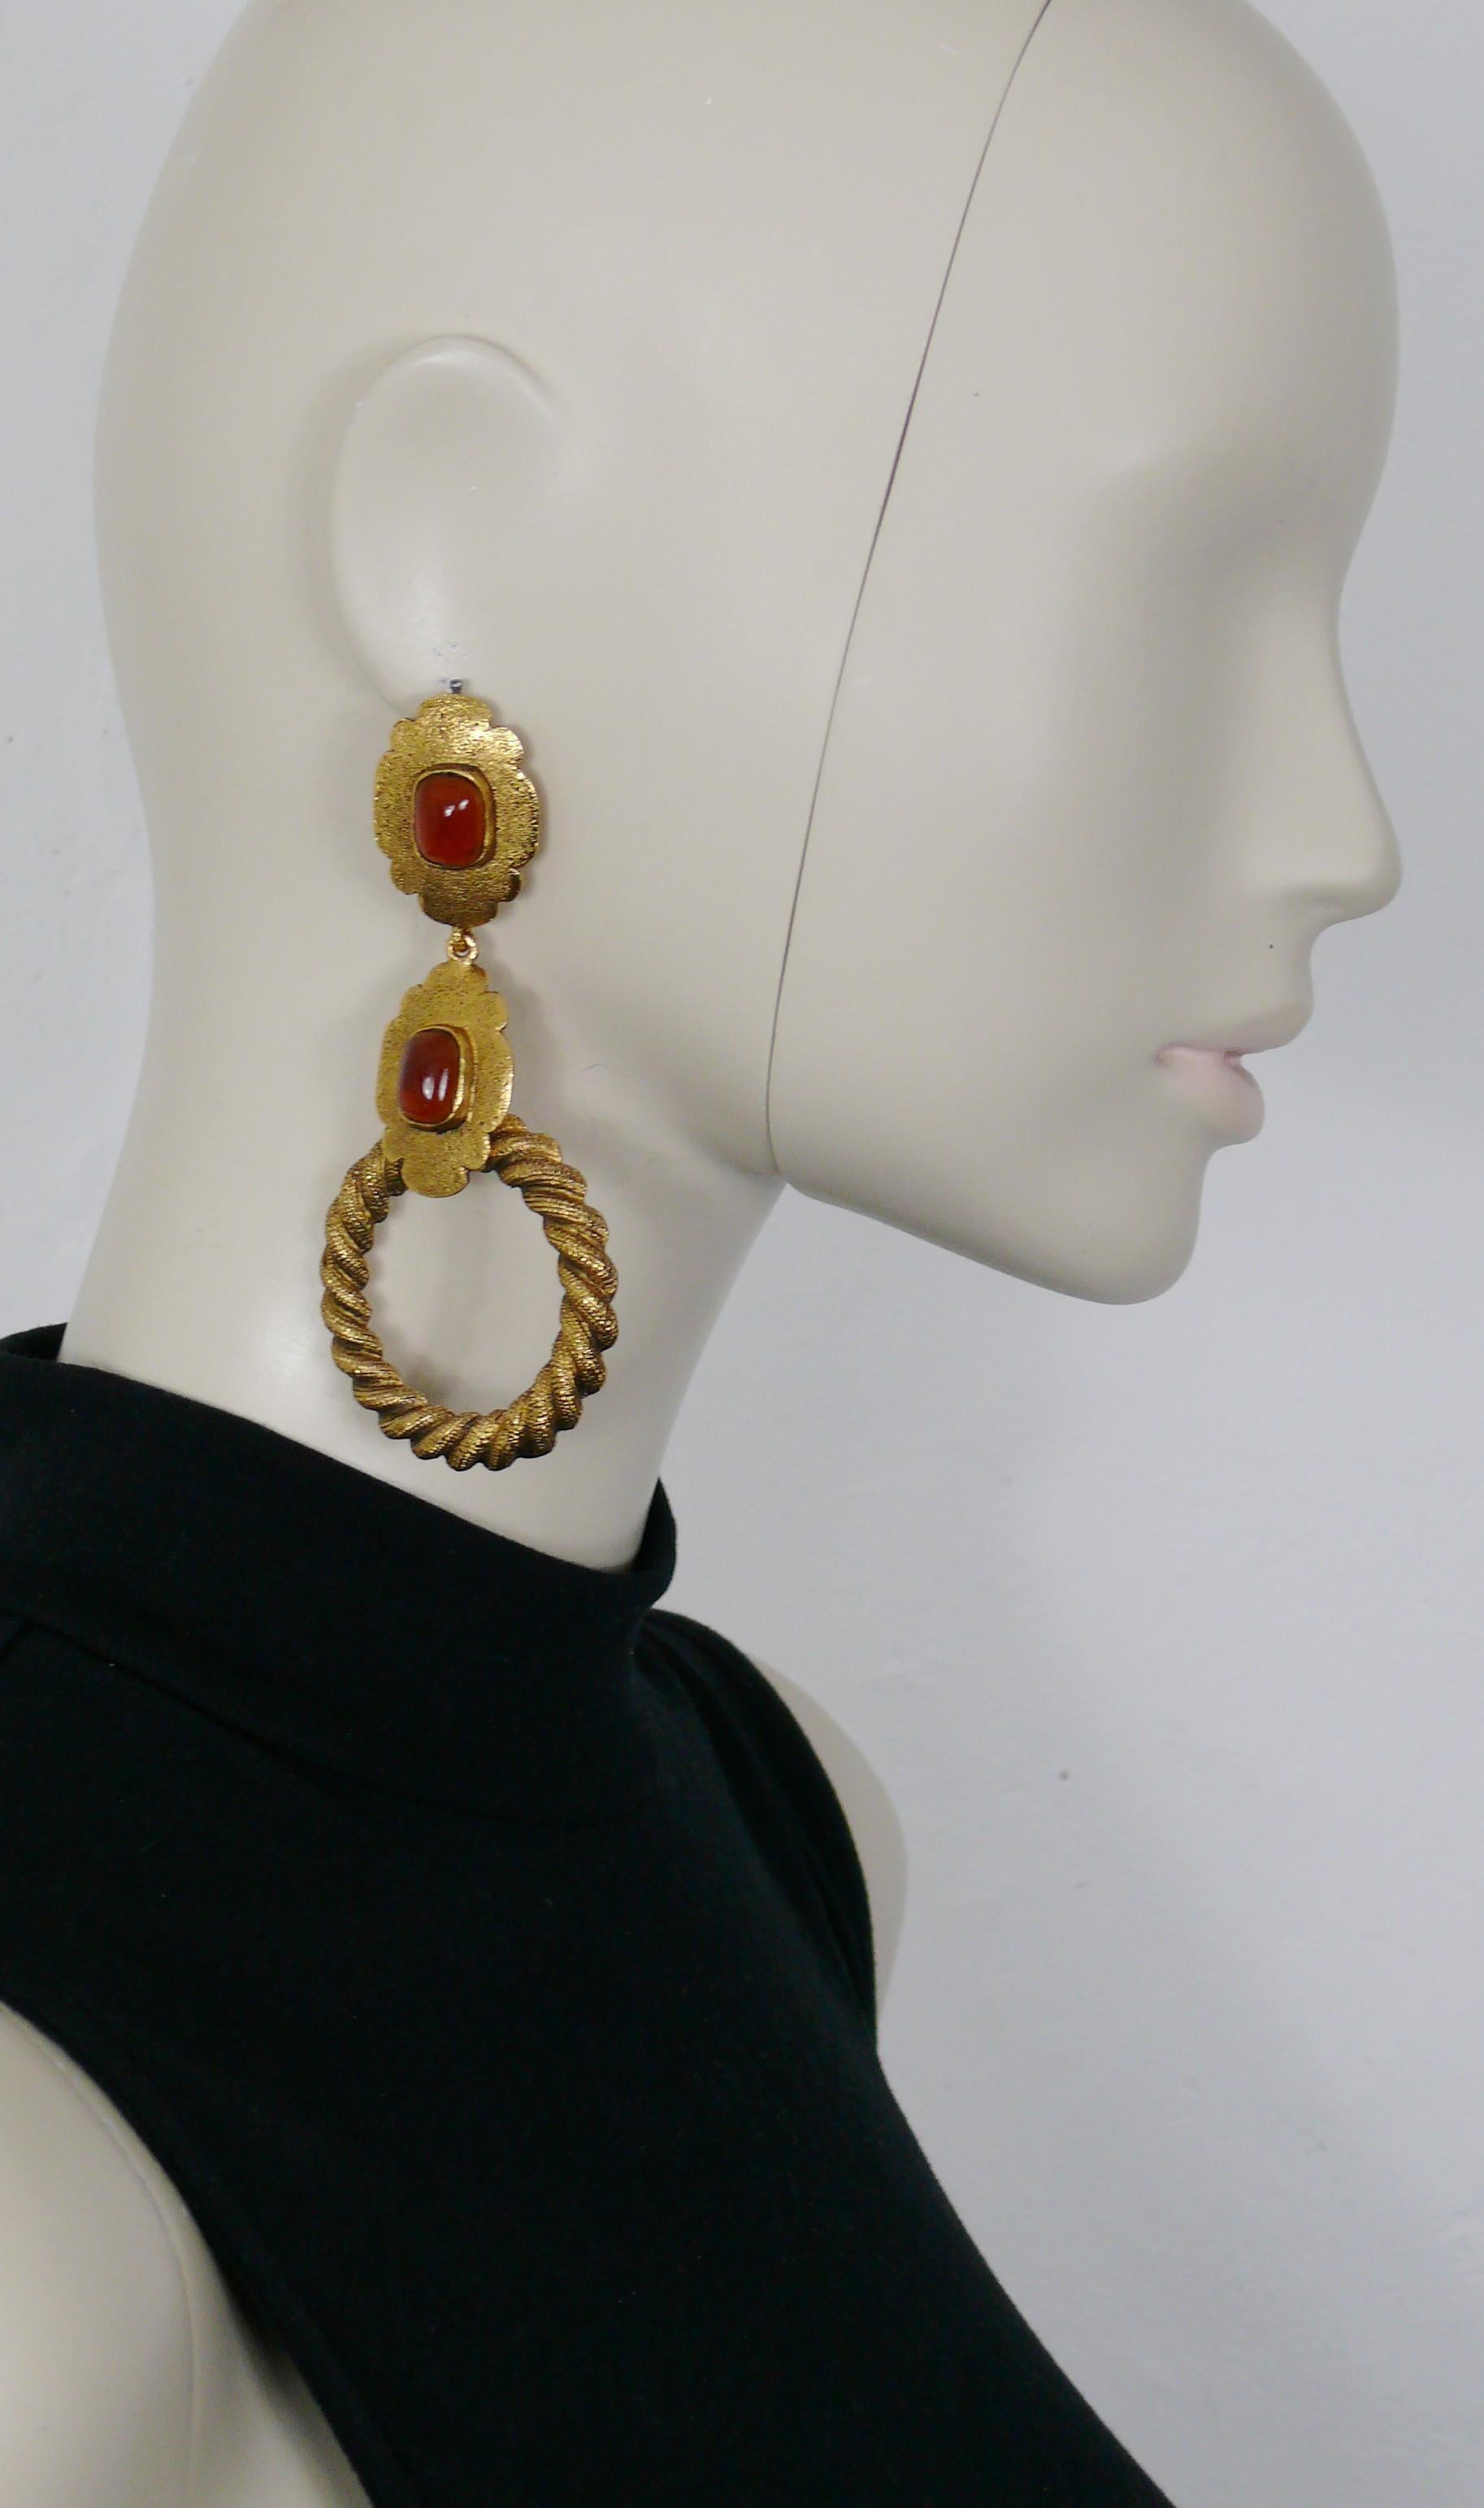 CHANEL vintage oversized antiqued gold toned dangling earrings (clip-on) embellished with MAISON GRIPOIX amber color glass cabochons.

Collection n°25 (year : 1990).

Embossed CHANEL 2 5 Made in France.
Private sale 